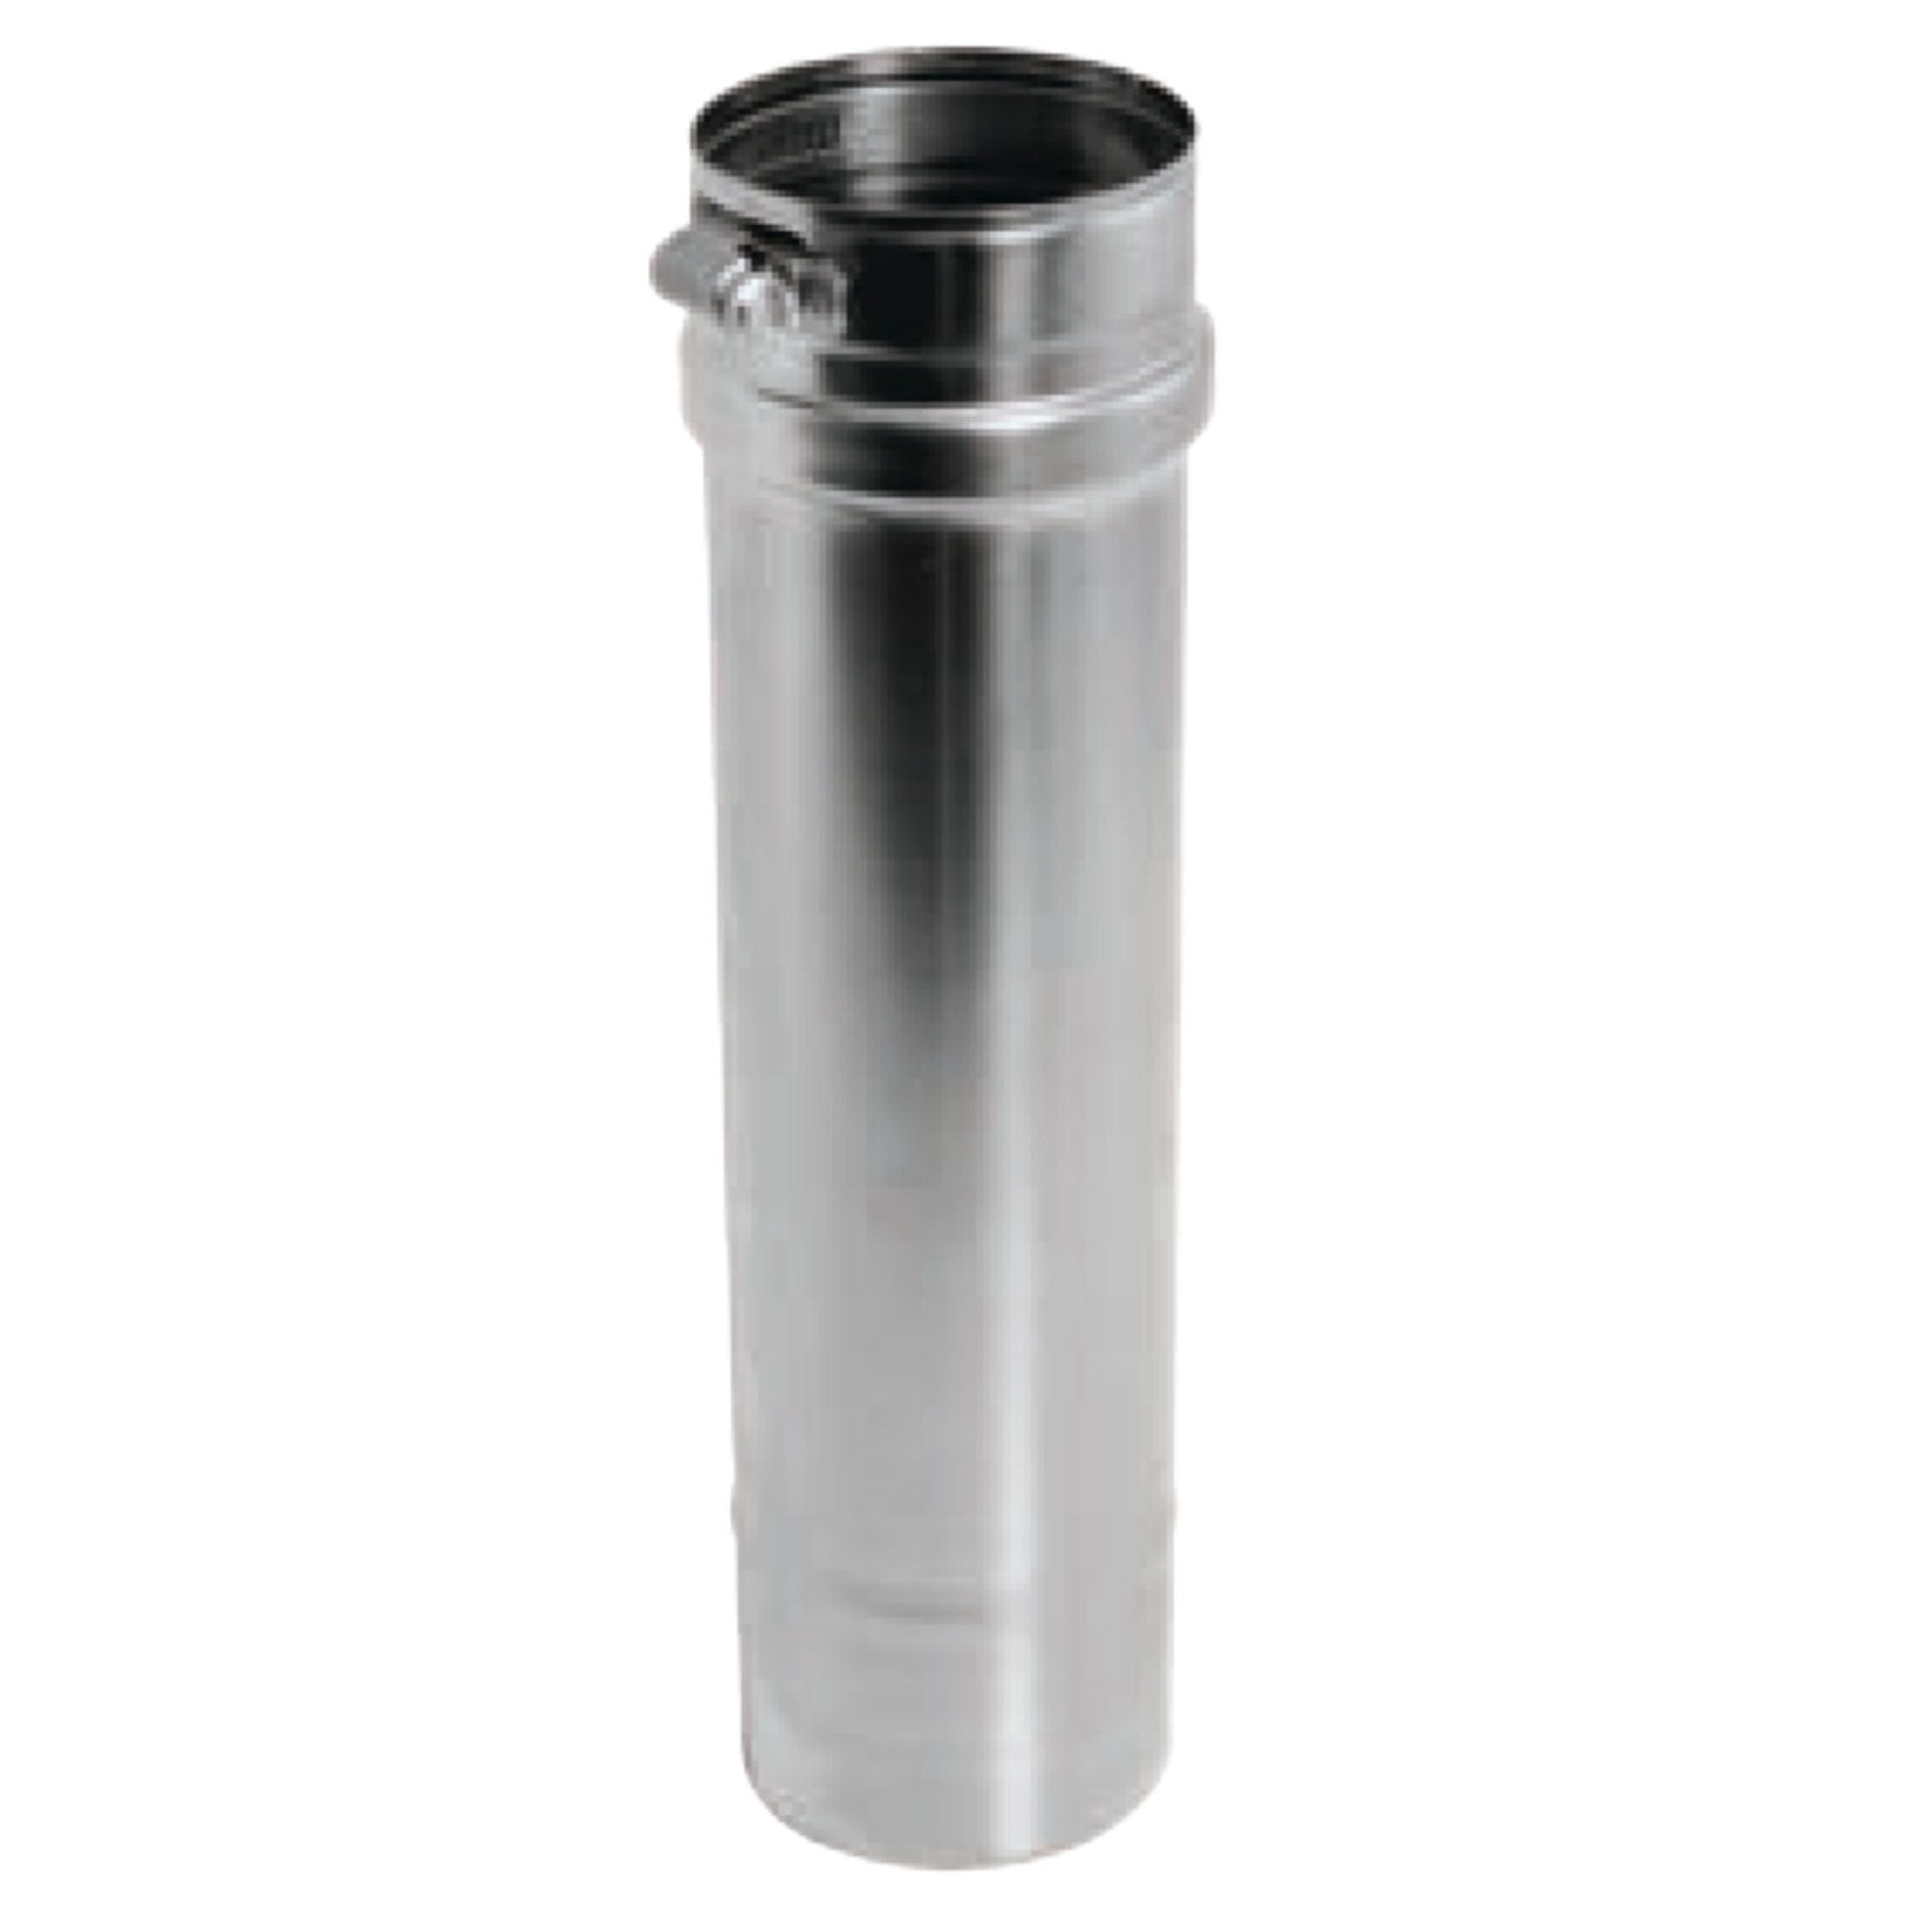 DuraVent FasNSeal 9" x 6" 29-4C Stainless Steel Vent Length